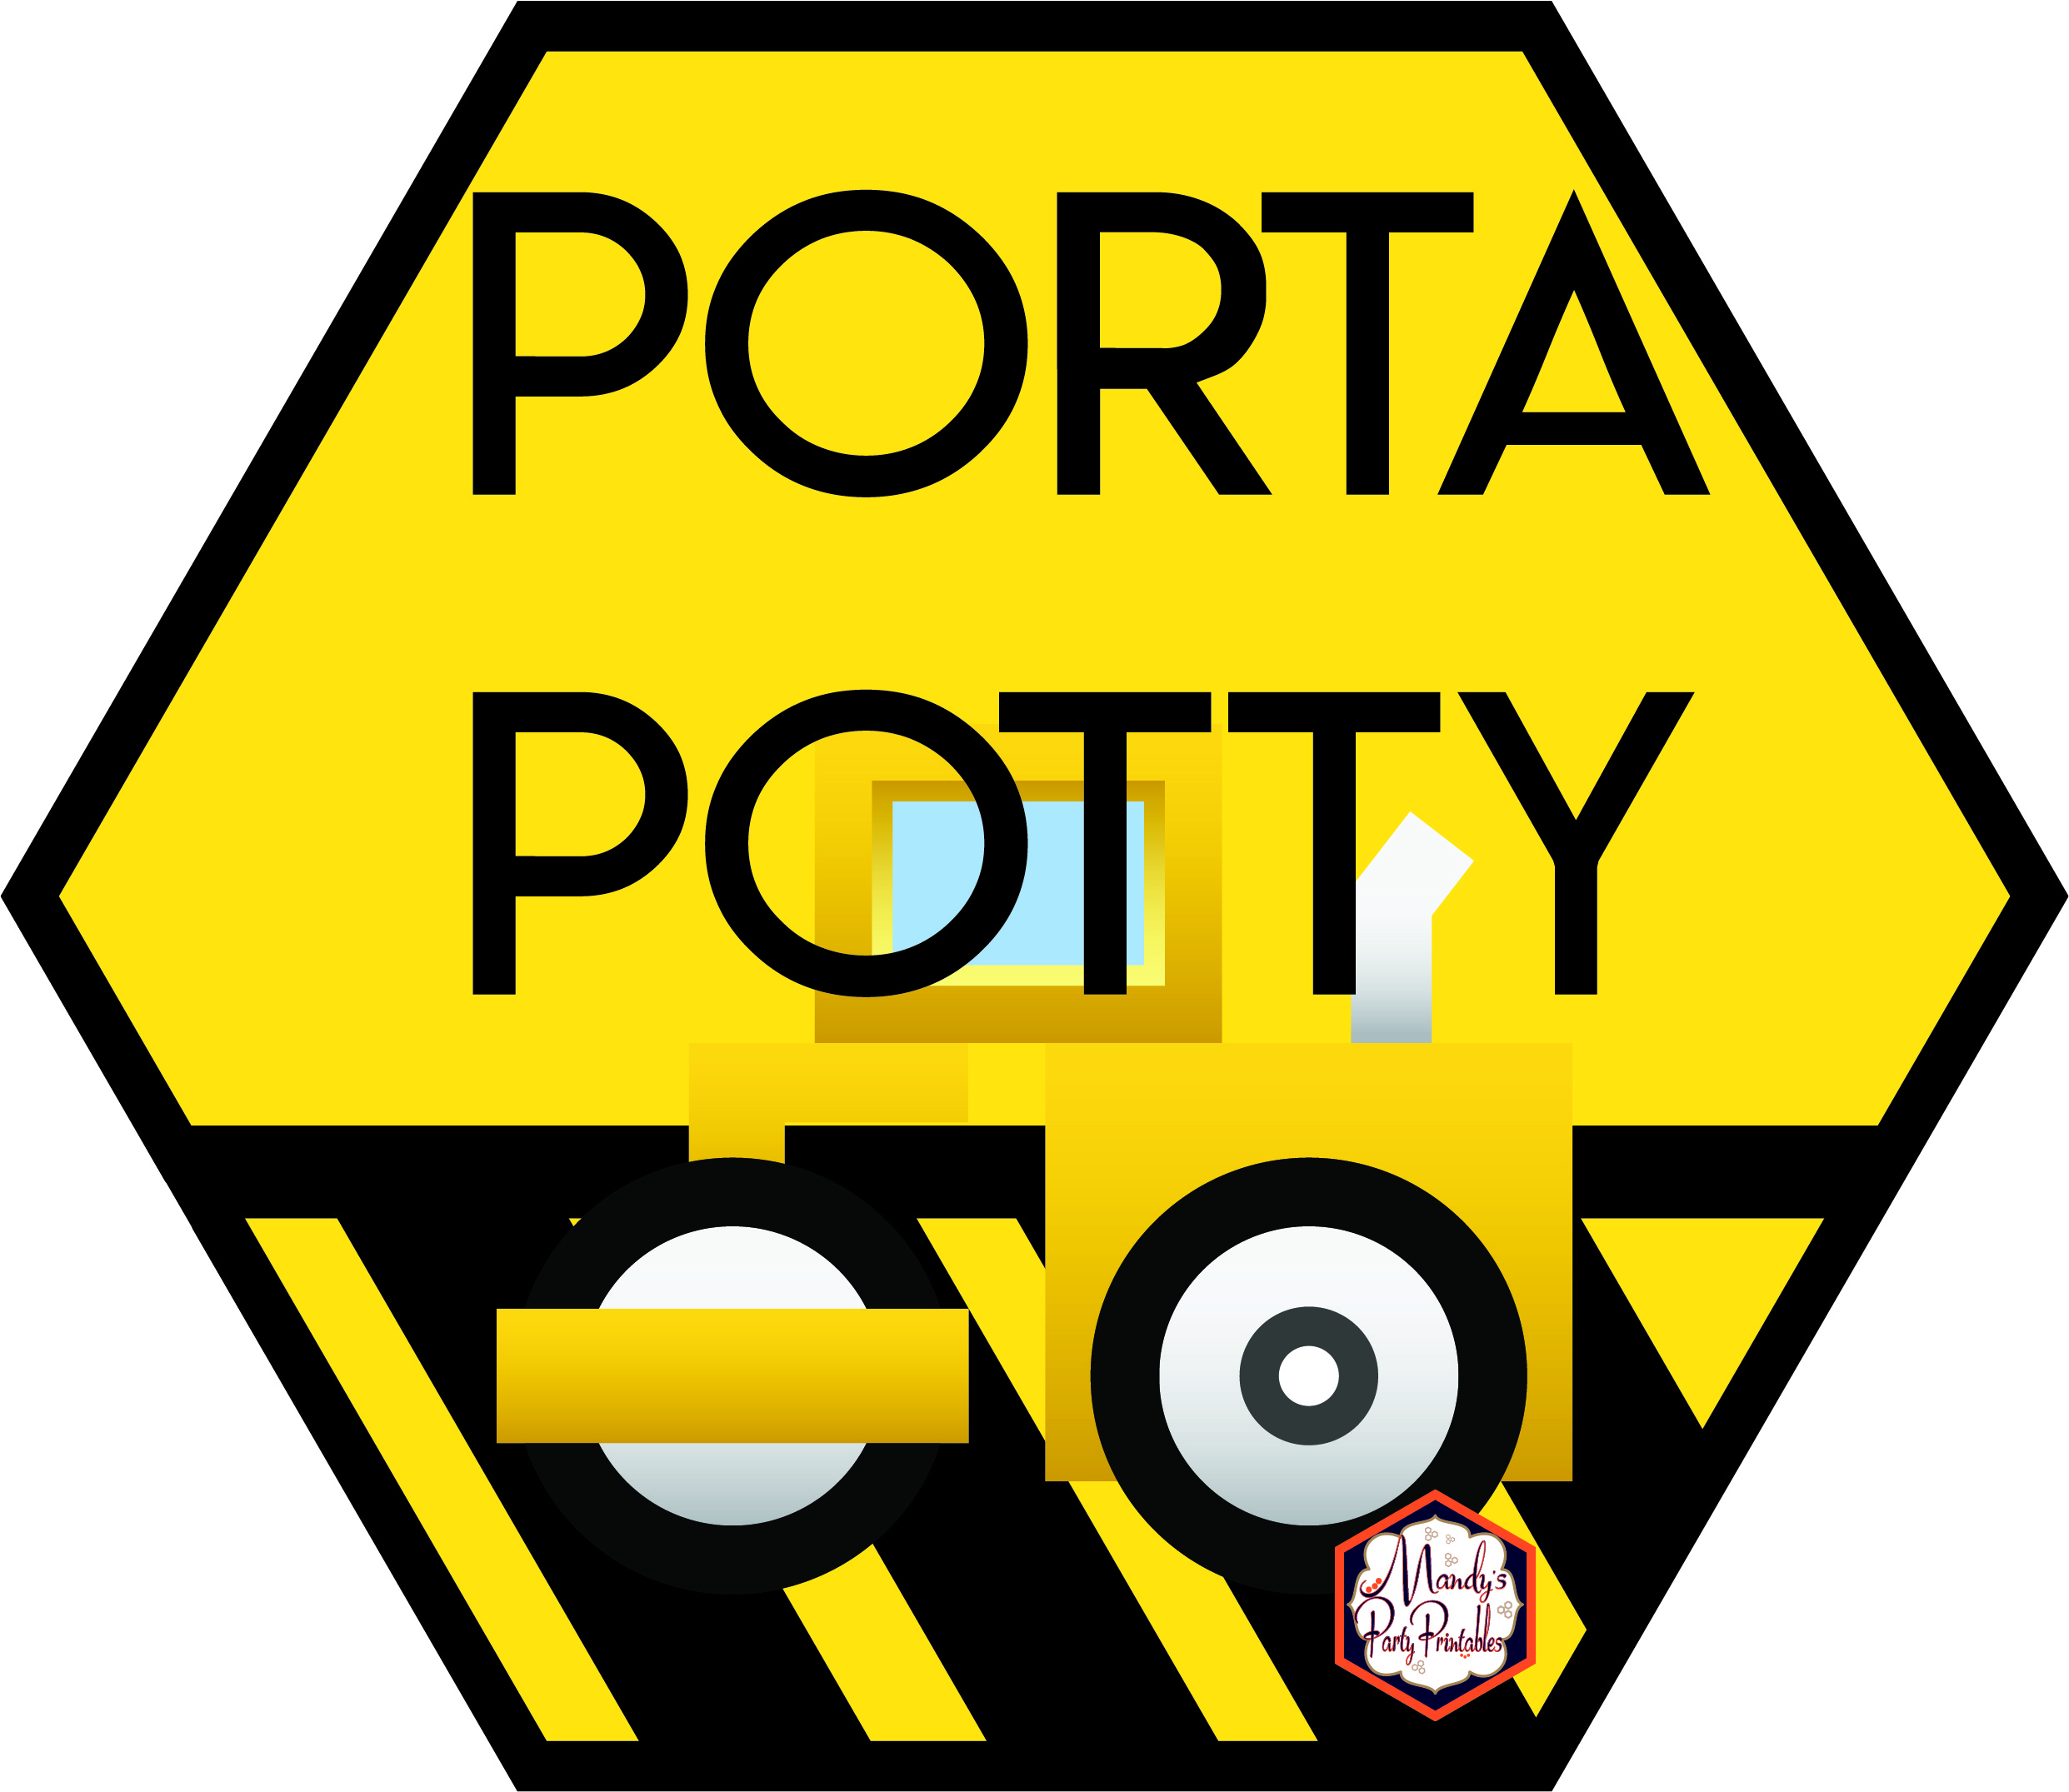 Porta Potty Sign from Construction Birthday Party Printables via Mandy's Party Printables